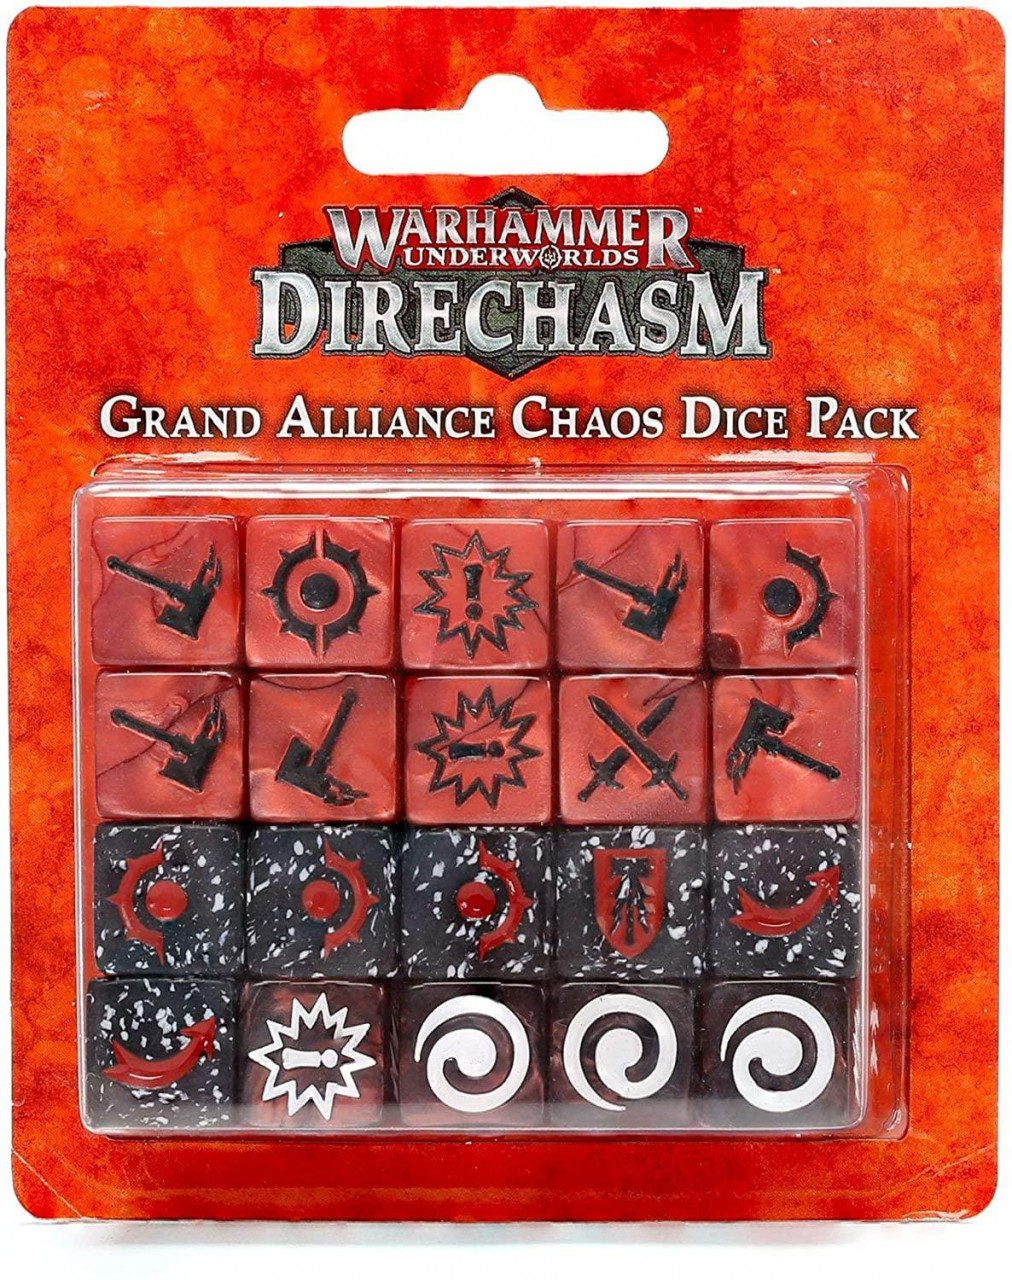 Whu: Grand Alliance Chaos Dice Pack